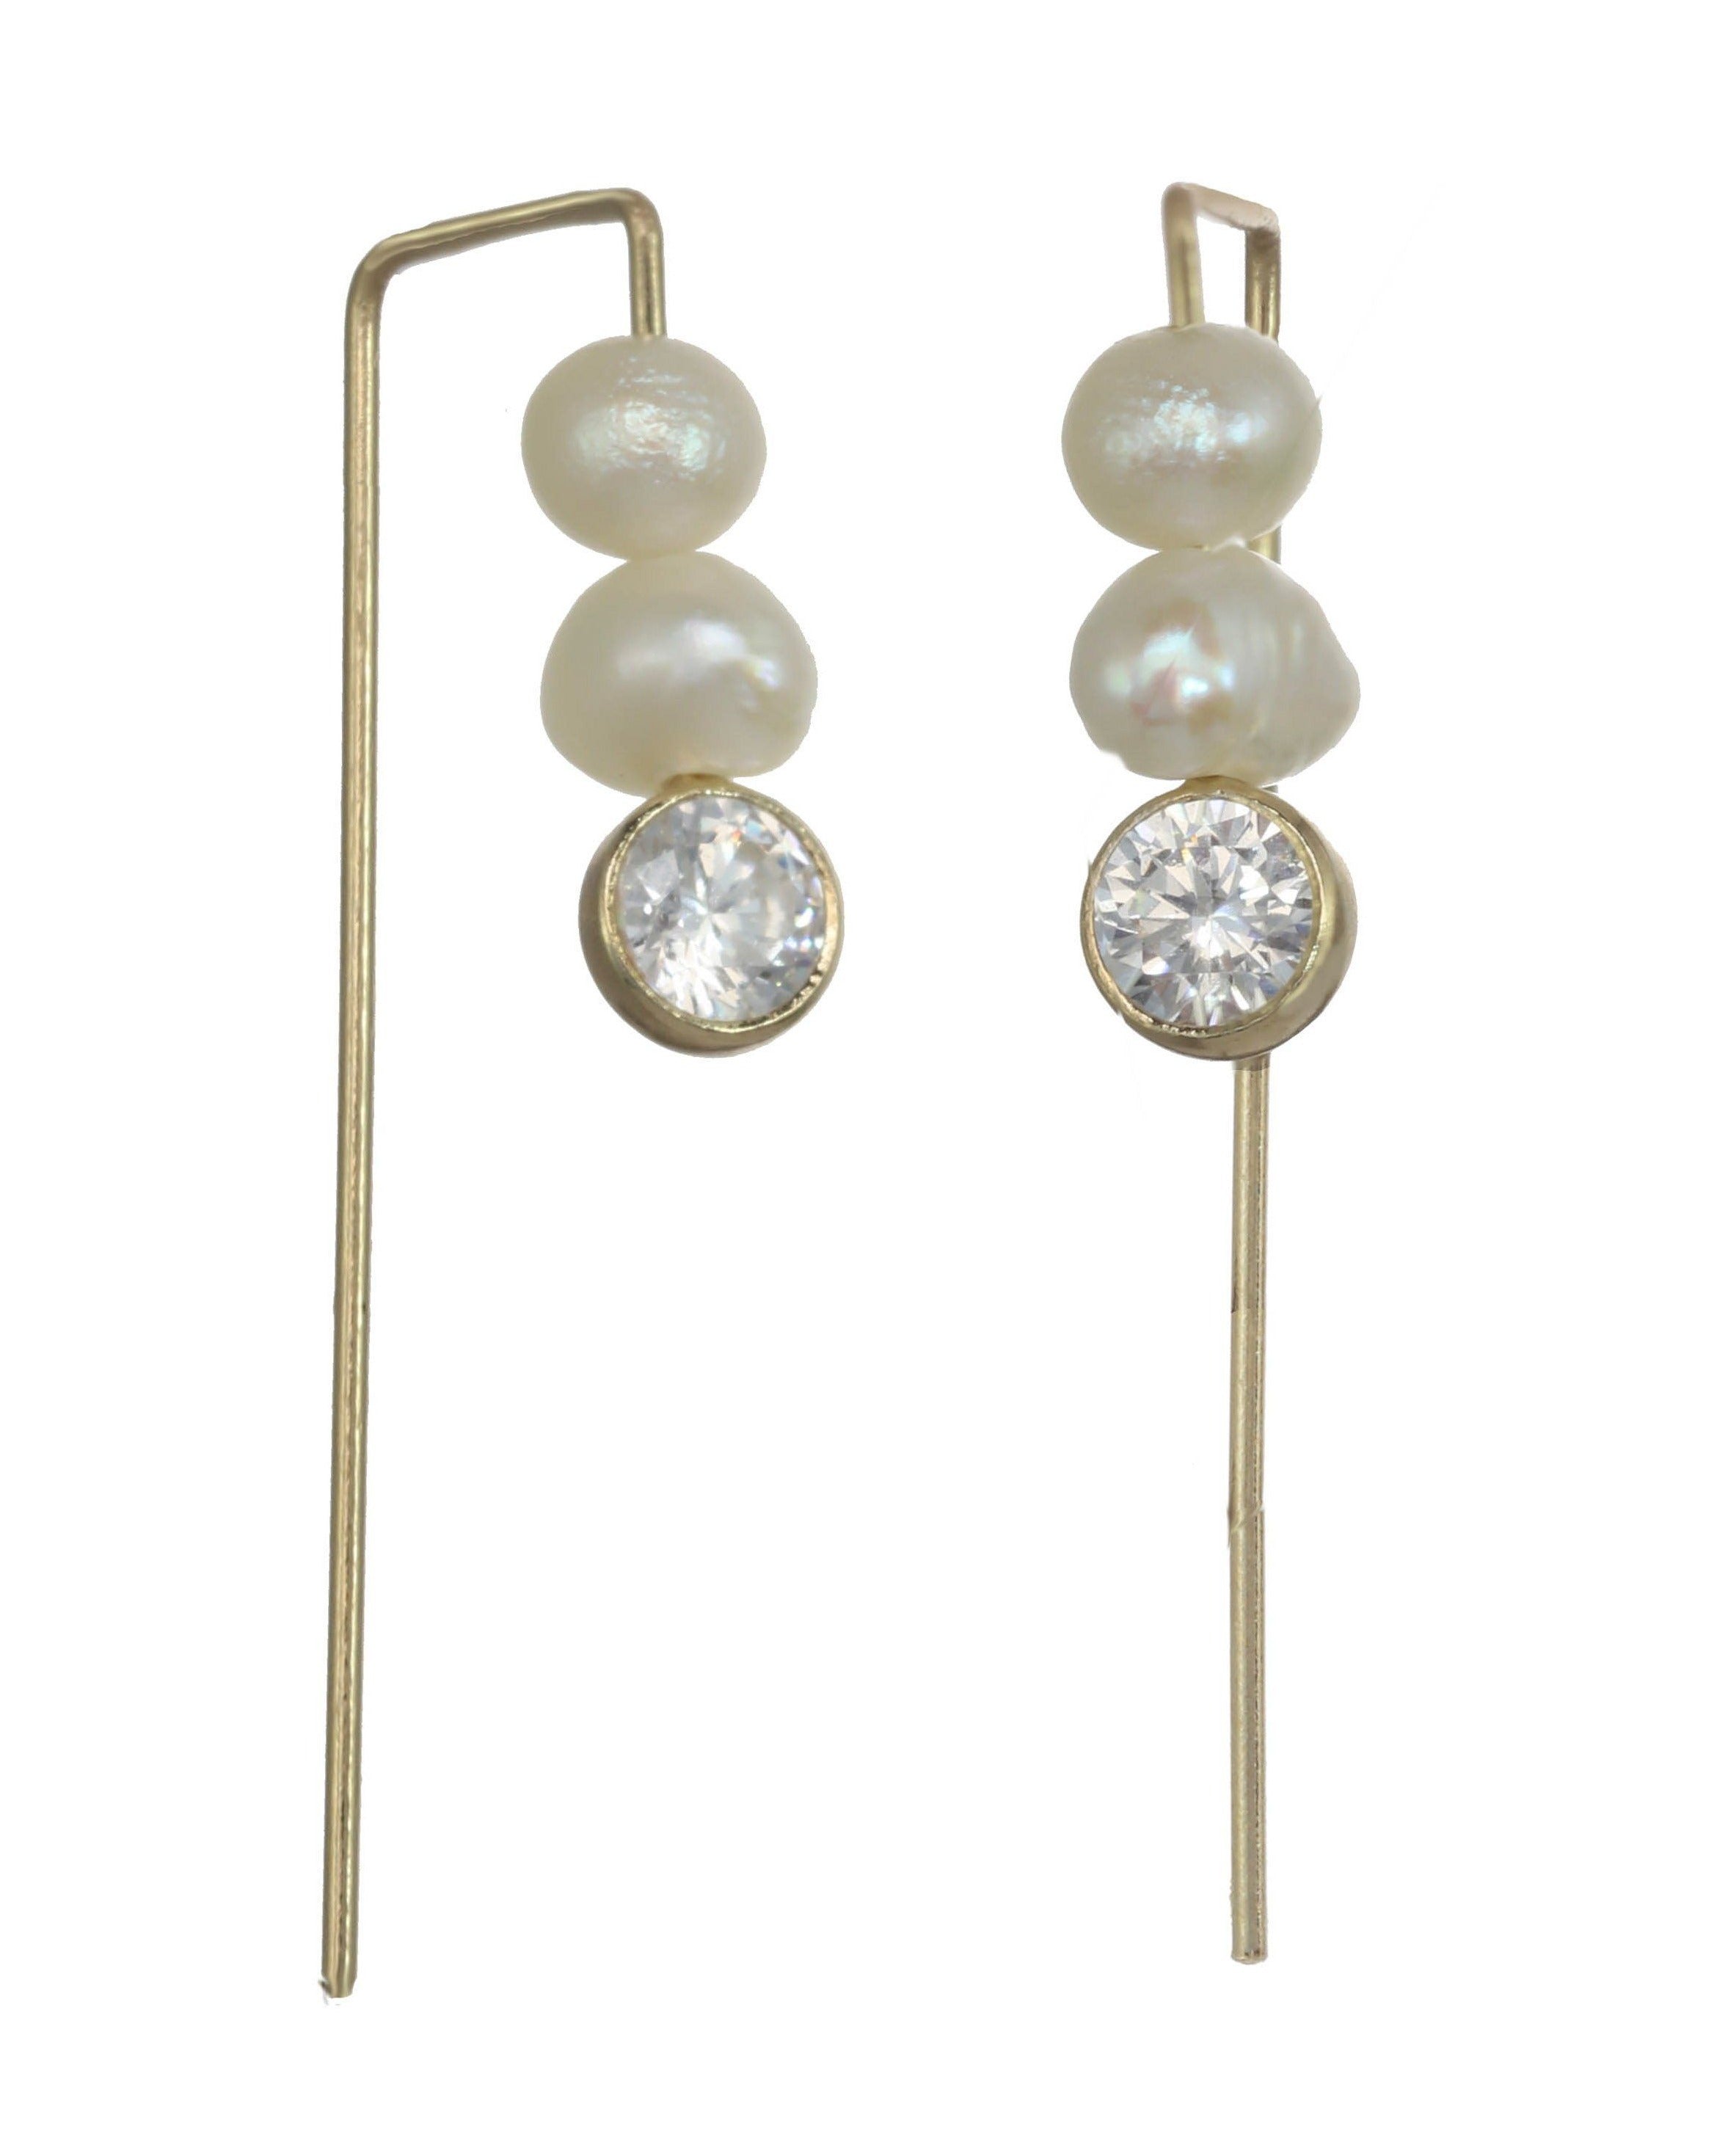 Clarita Pearl Earrings by KOZAKH. Bar earrings in 14K Gold Filled, featuring a 3mm Cubic Zirconia Bezel and 4-5mm white potato shaped Pearls.